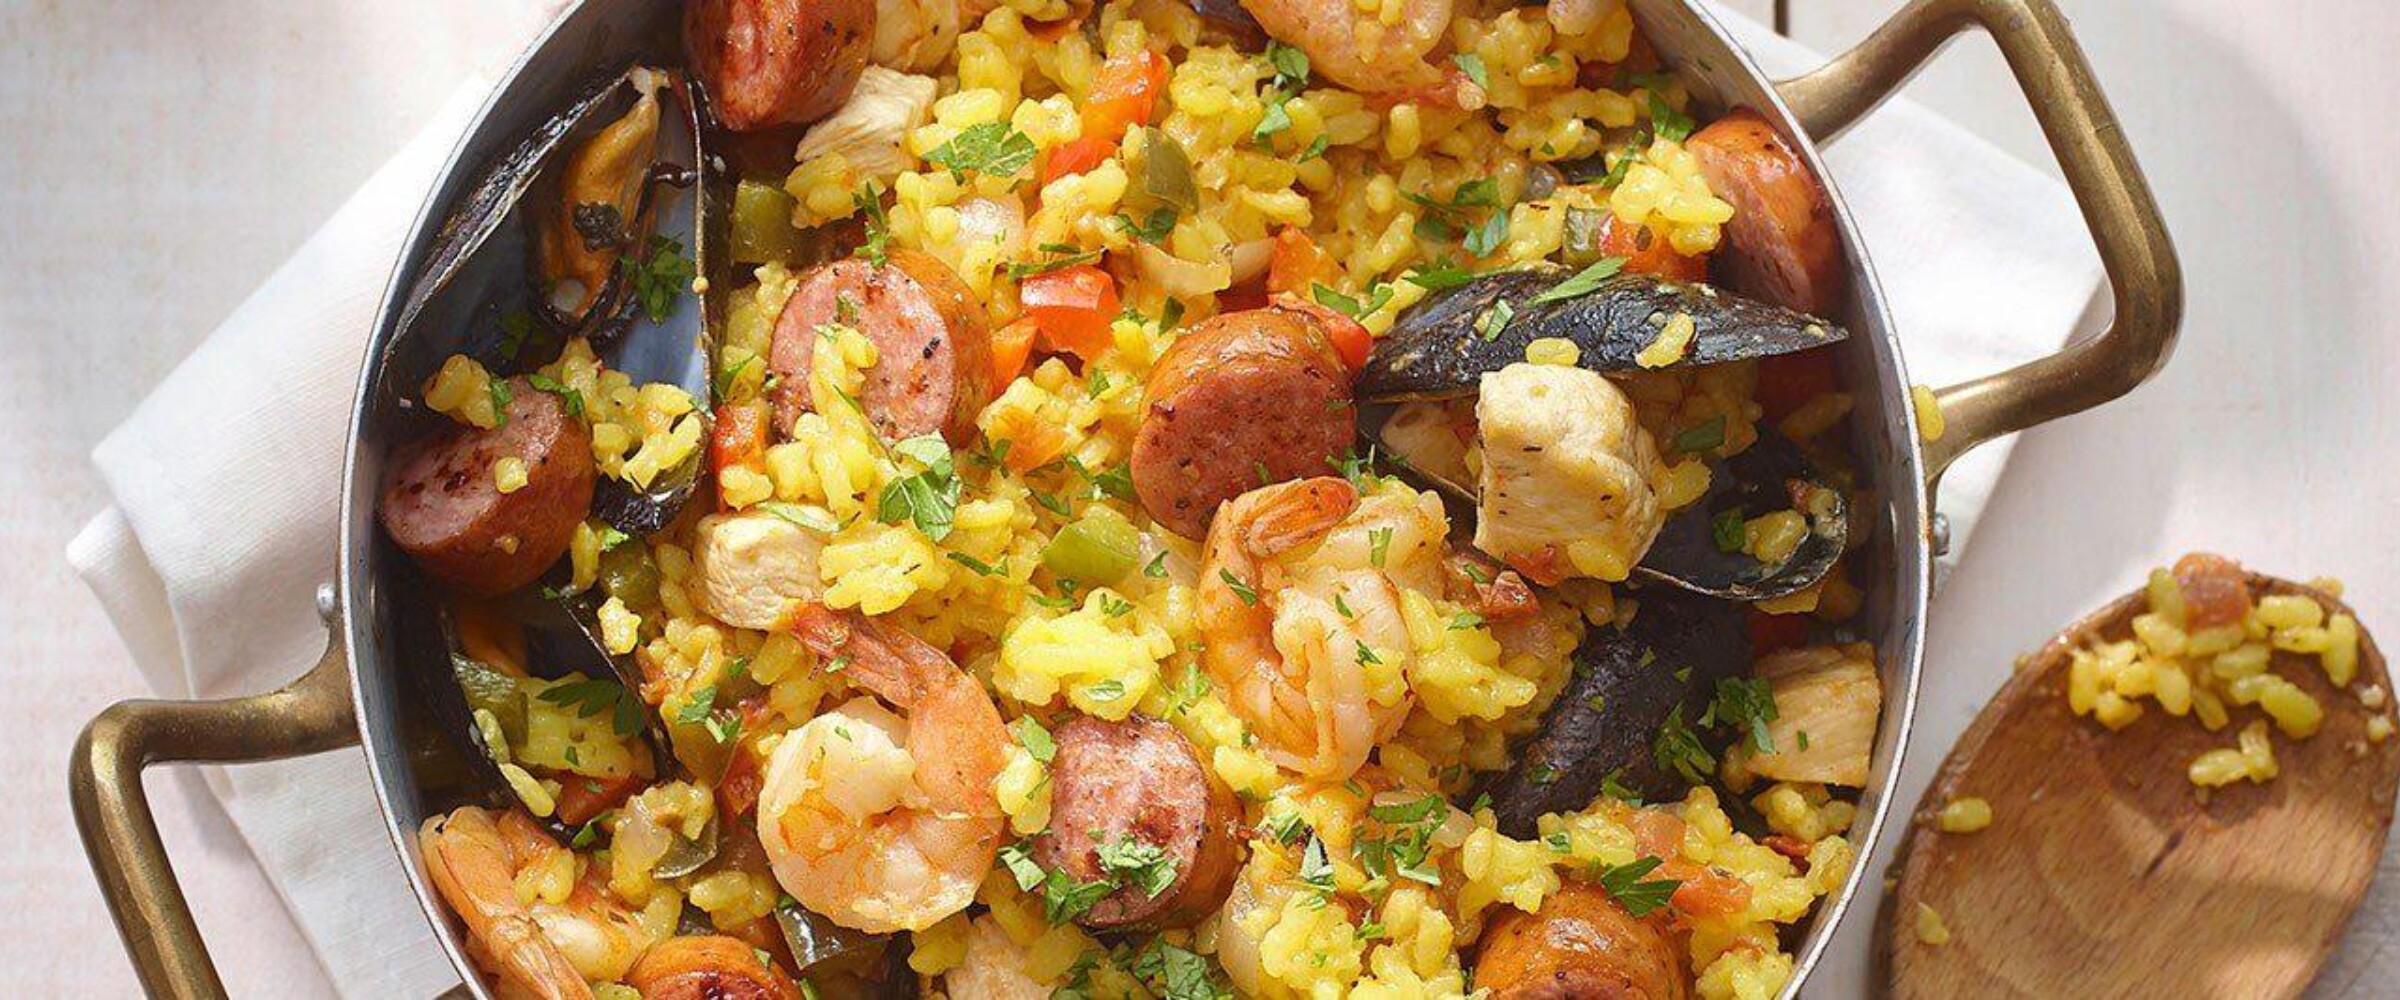 Photo of paella with chicken and sausage